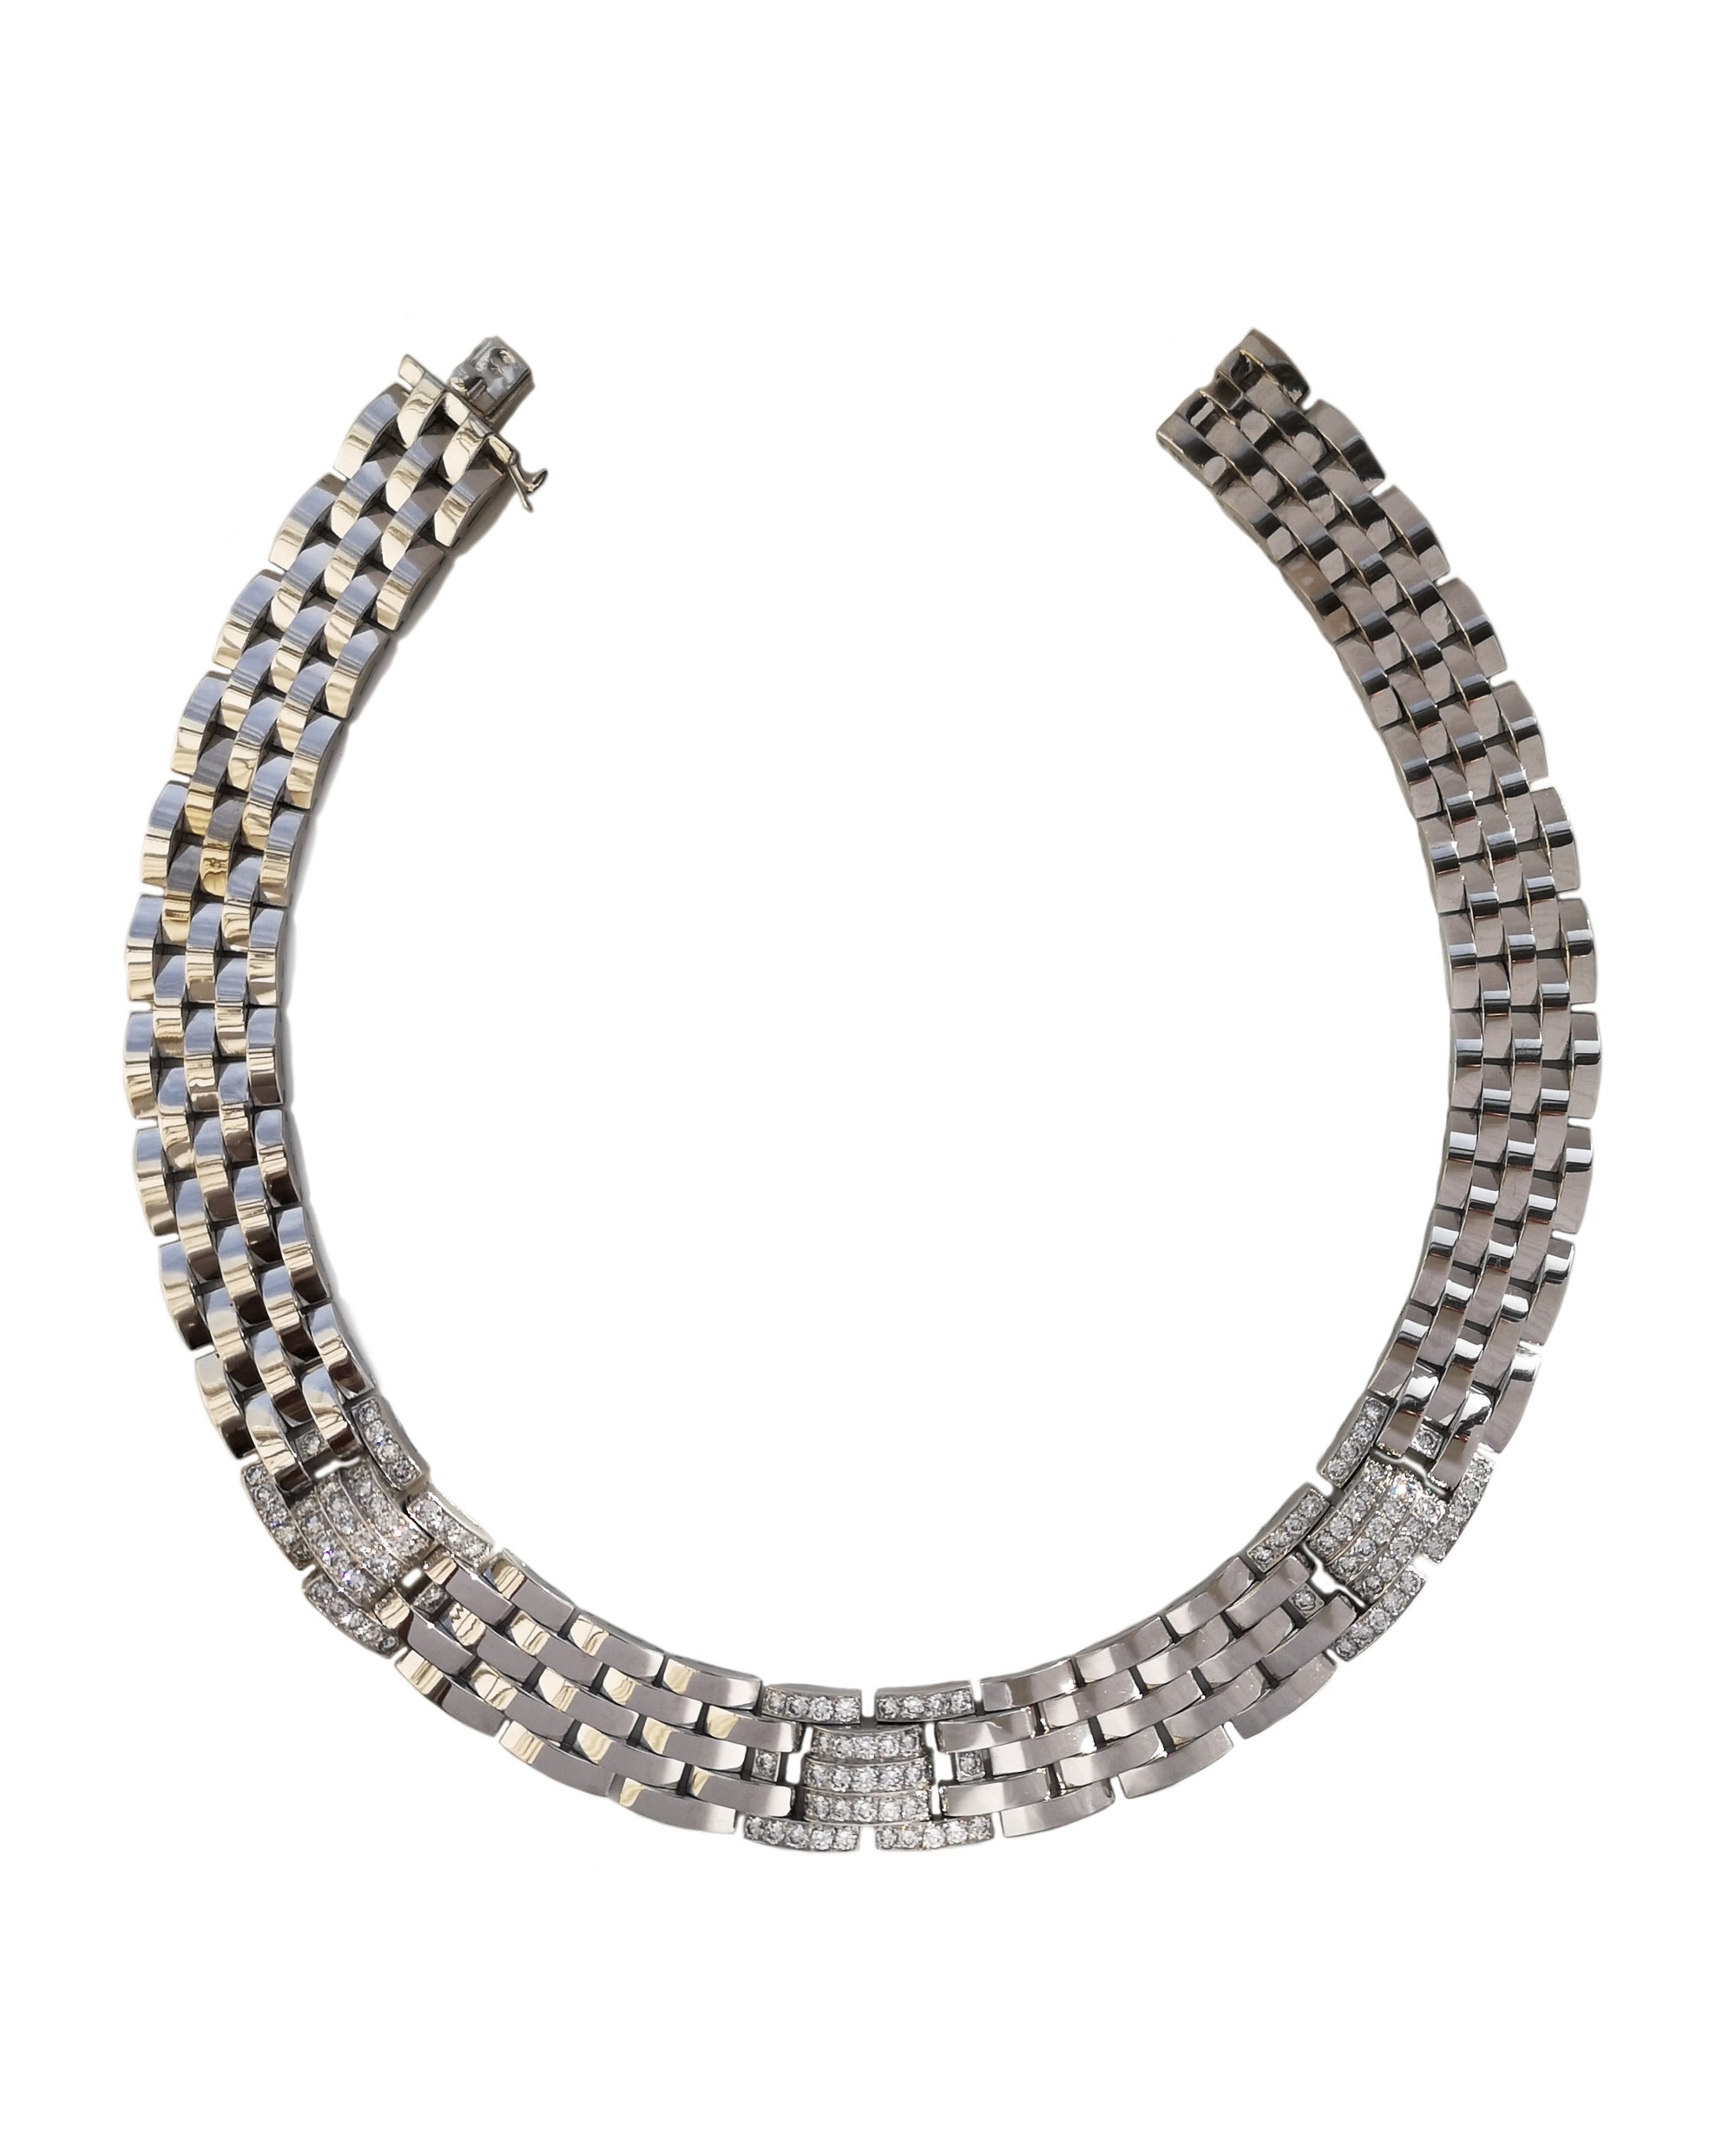 Cartier Maillon Panthere 6.25ct Diamond Necklace